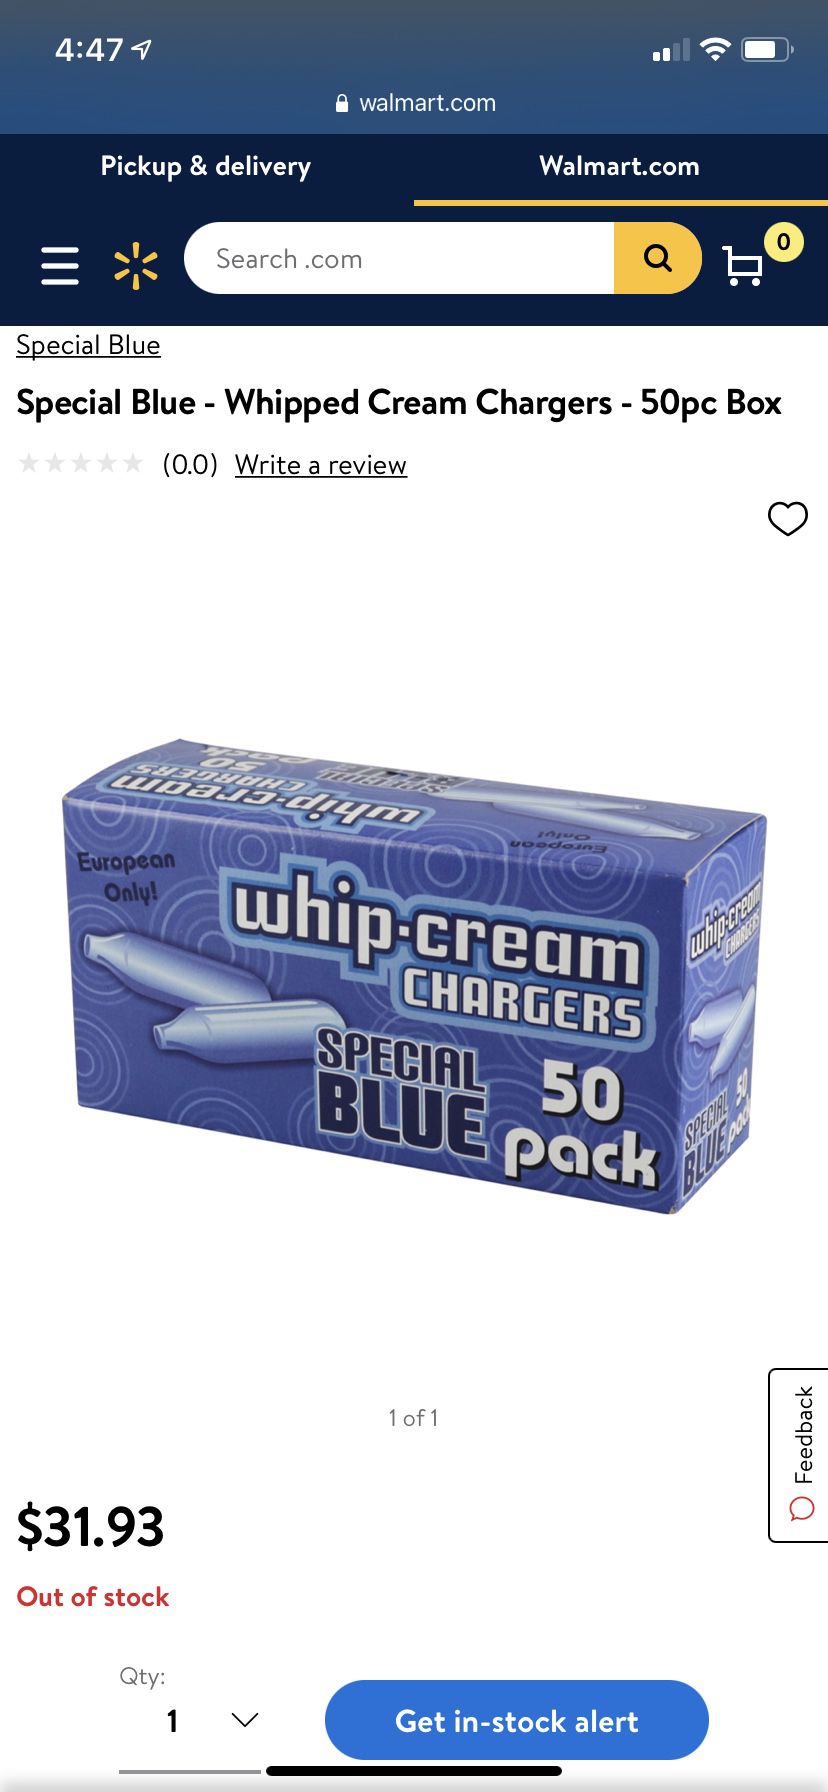 WHIP CREAM CHARGERS SPECIAL BLUE CHECK DESCRIPTION